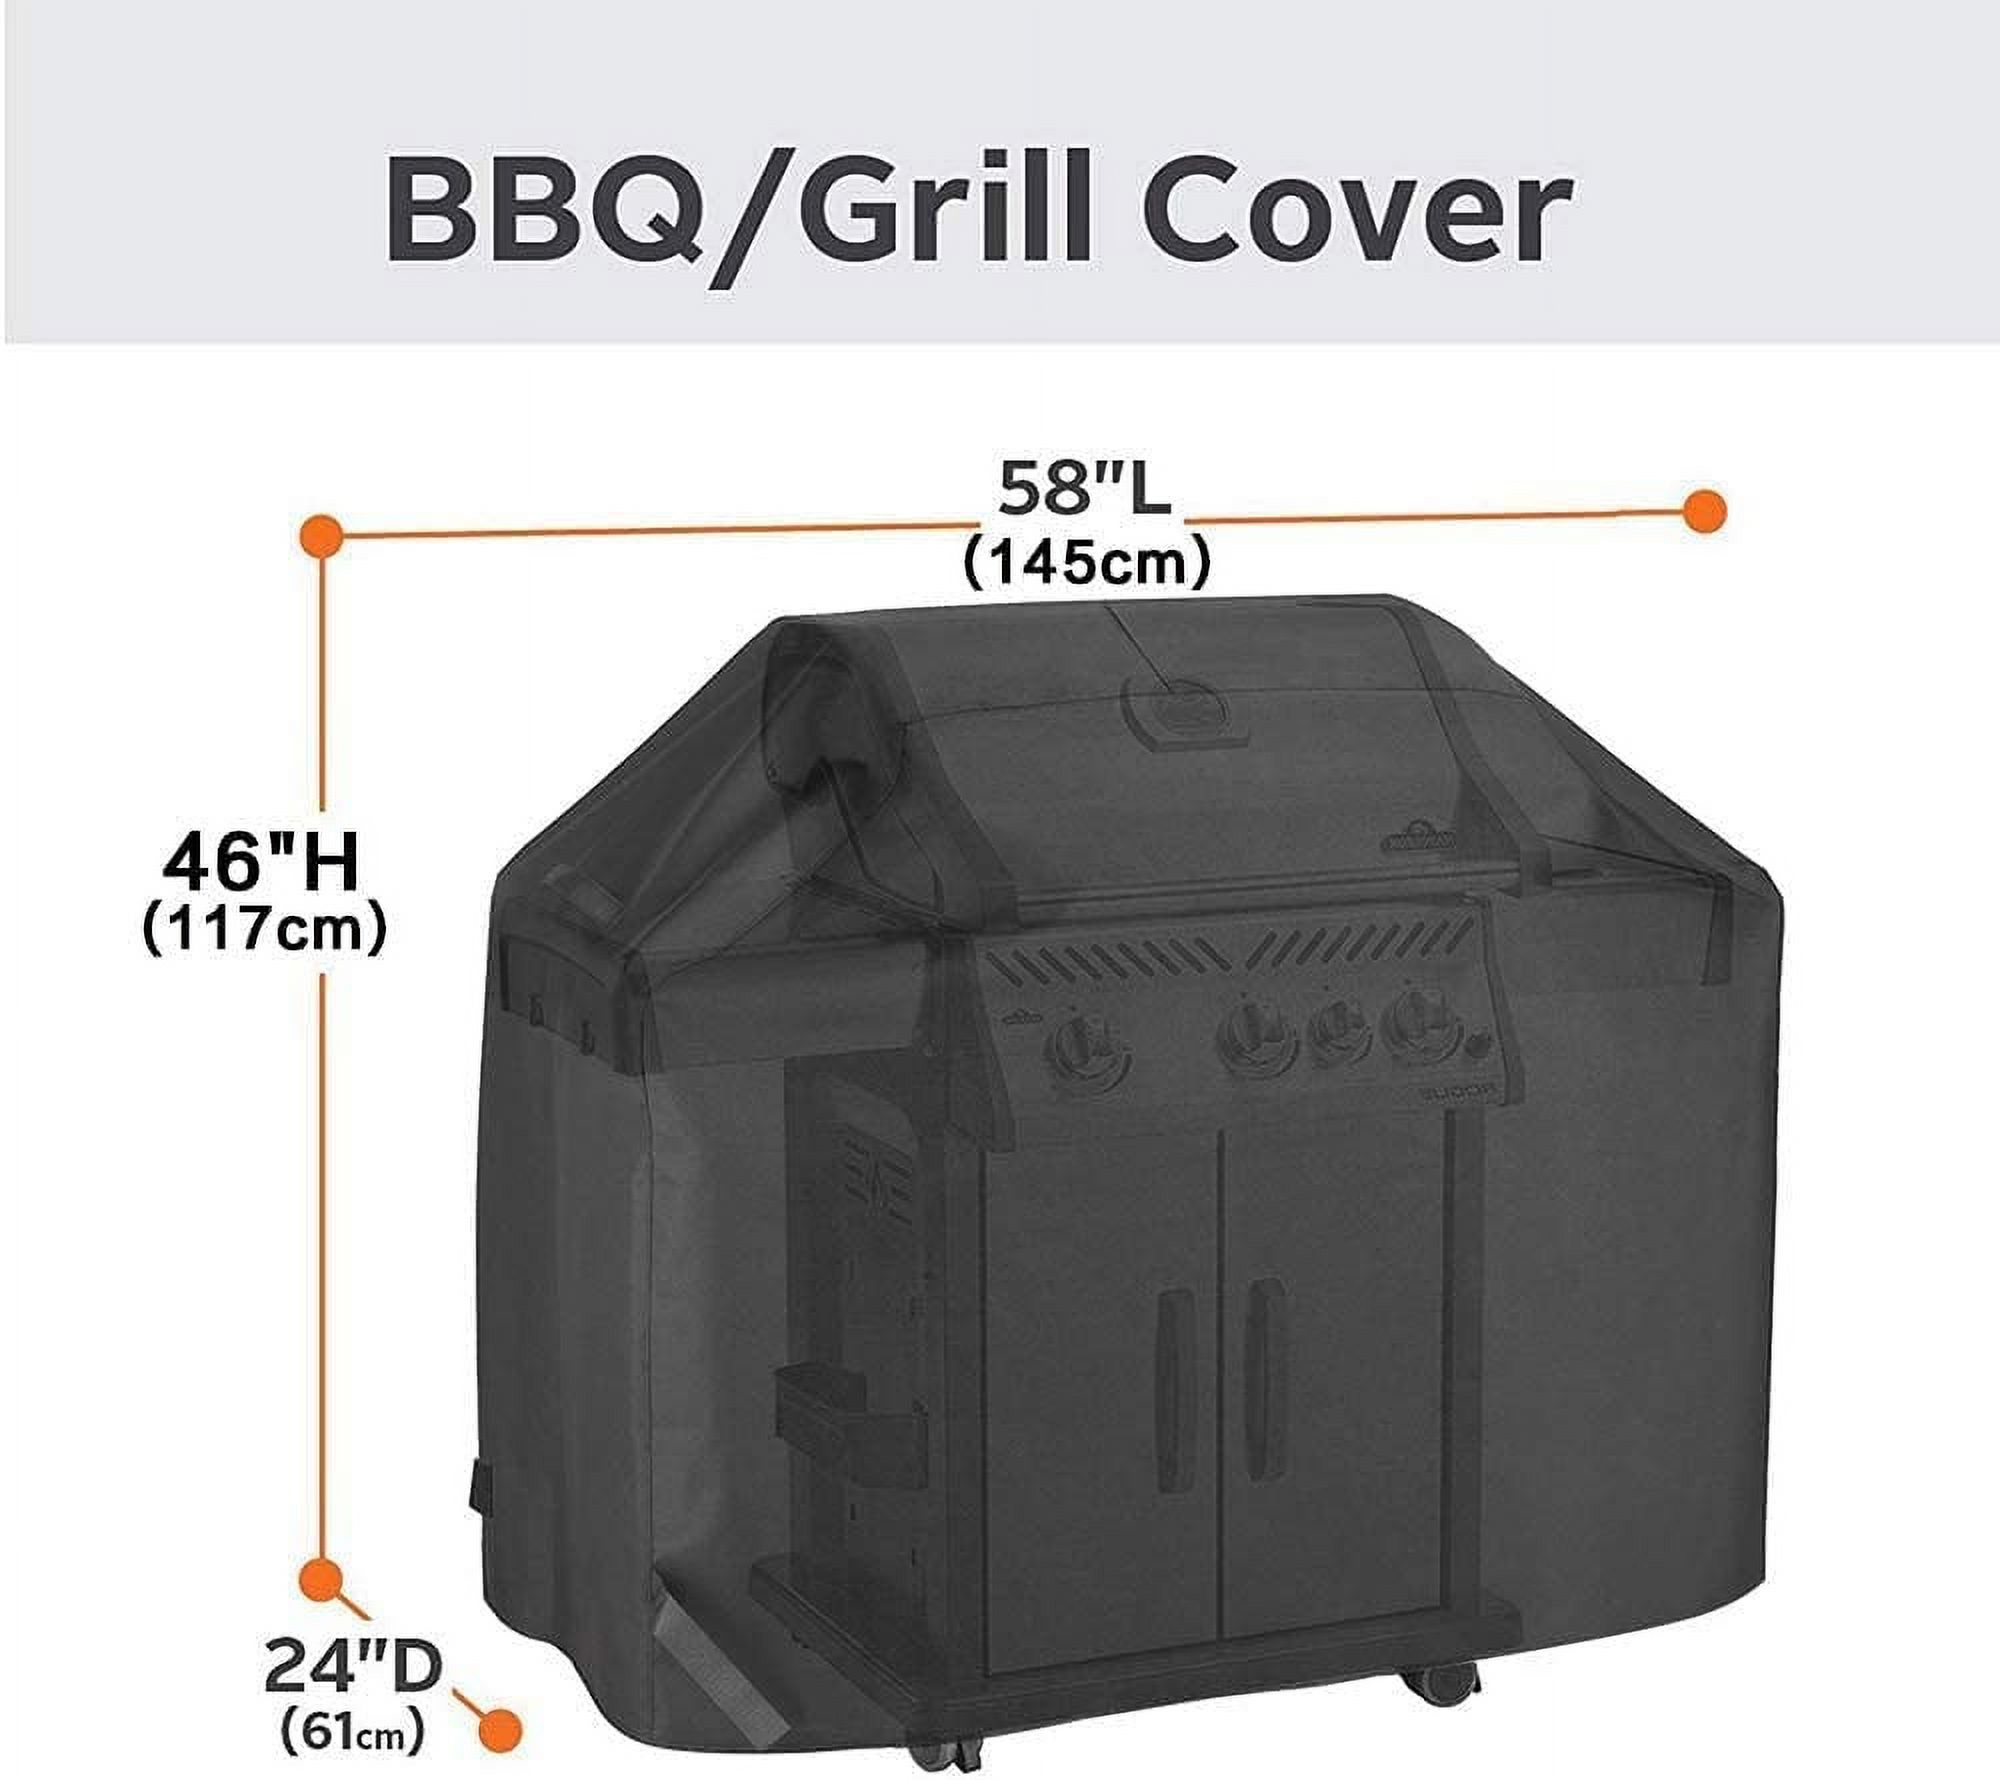 BBQ Grill Cover, 58-inch Waterproof Heavy-Duty Premium BBQ Grill Cover Gas Barbeque Grill Cover -Large((L:58" W: 24" H:46") Black - image 2 of 8